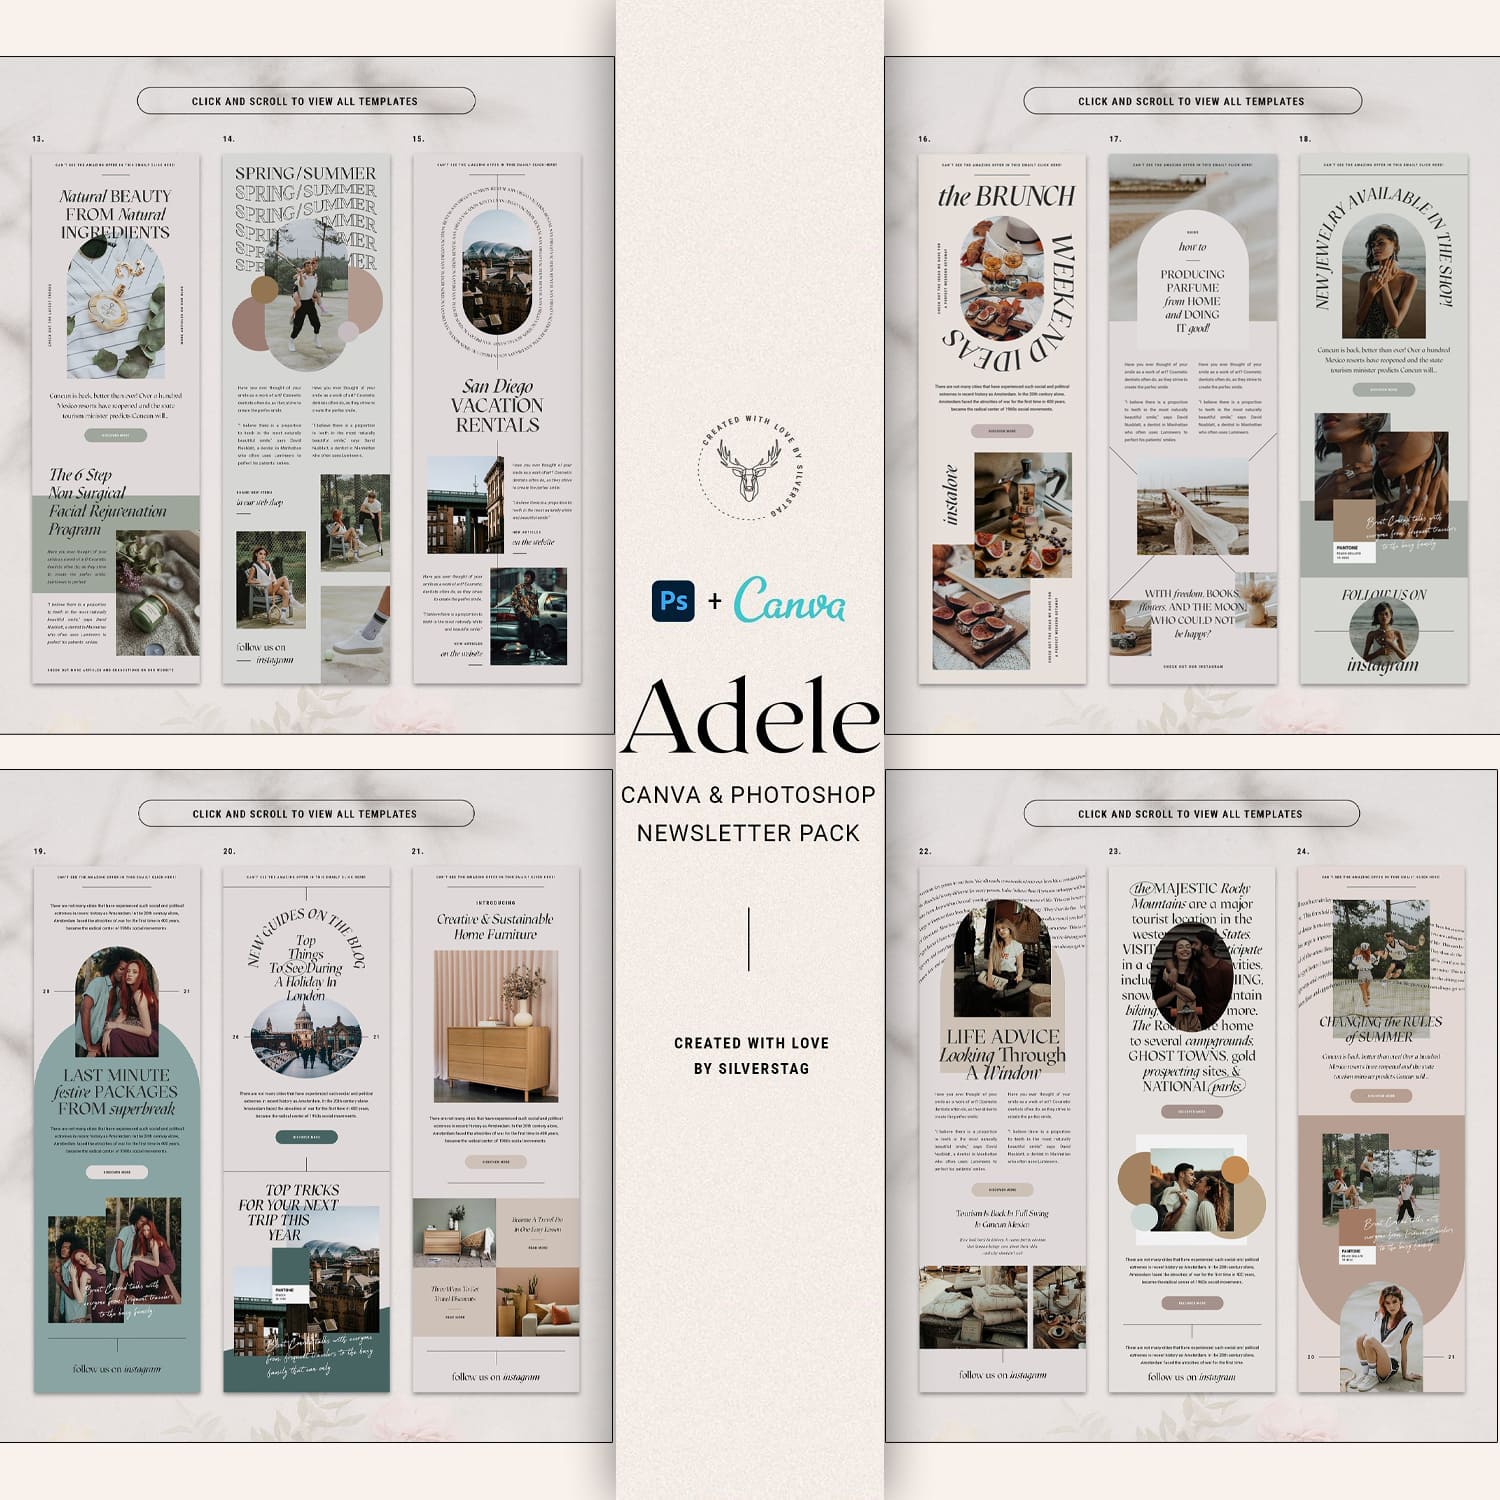 Adele - PS+Canva Newsletter Pack cover.